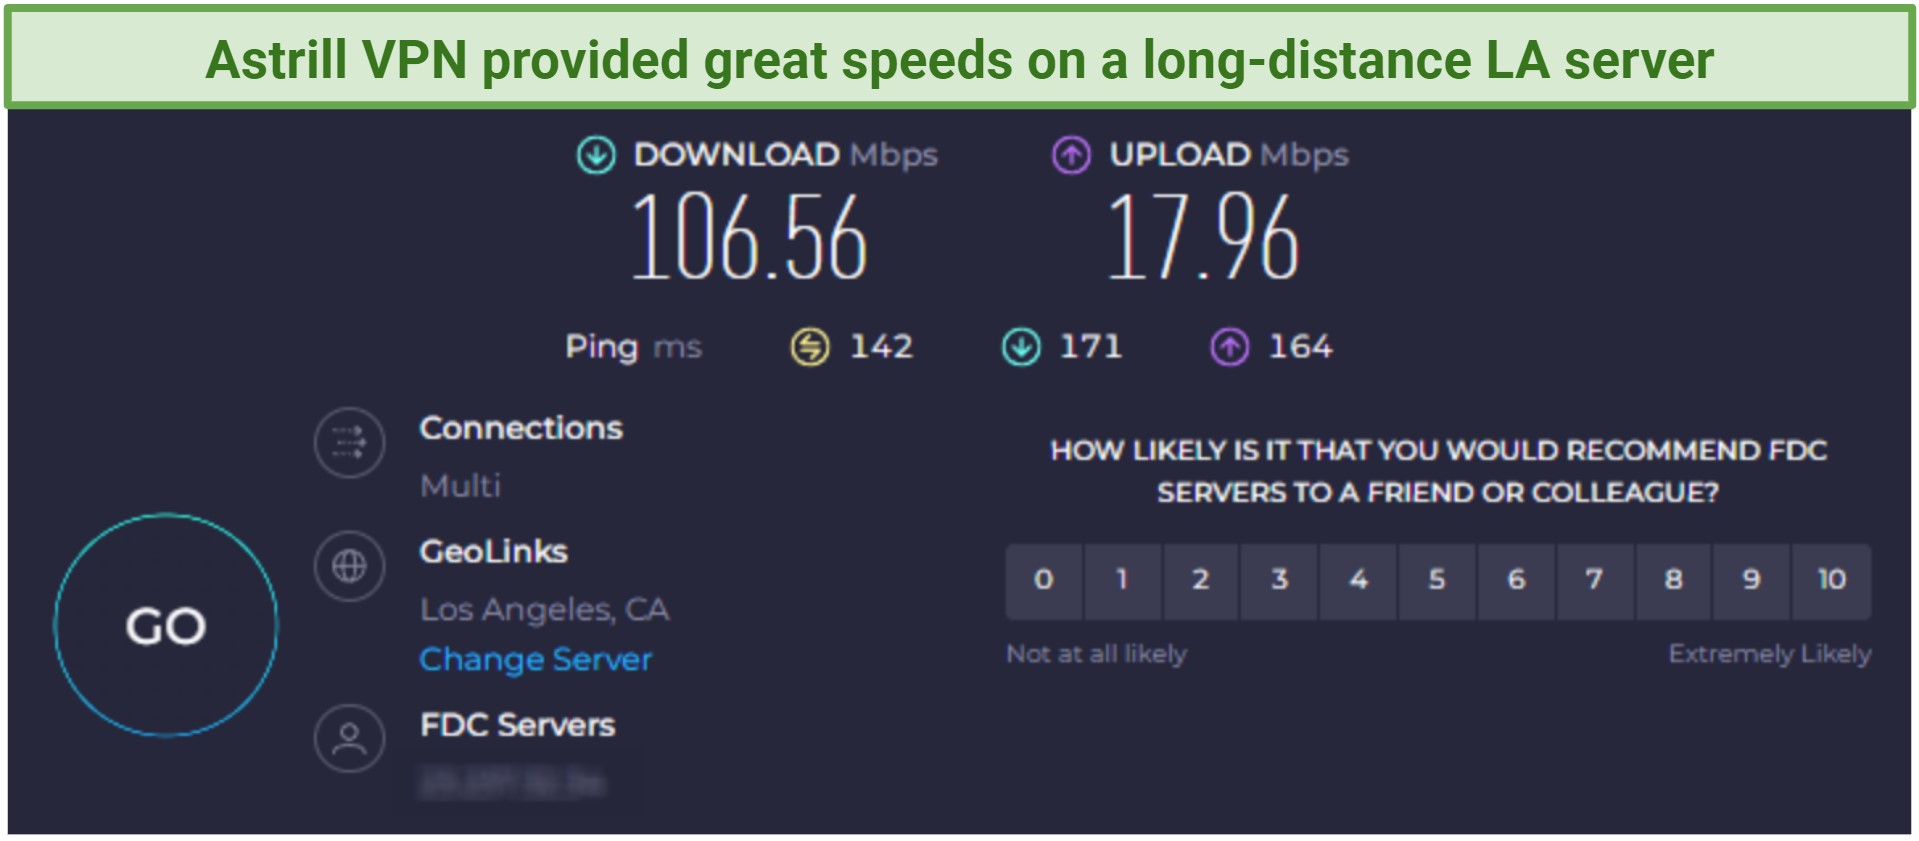 Astrill VPN's speed test results on an LA, USA server